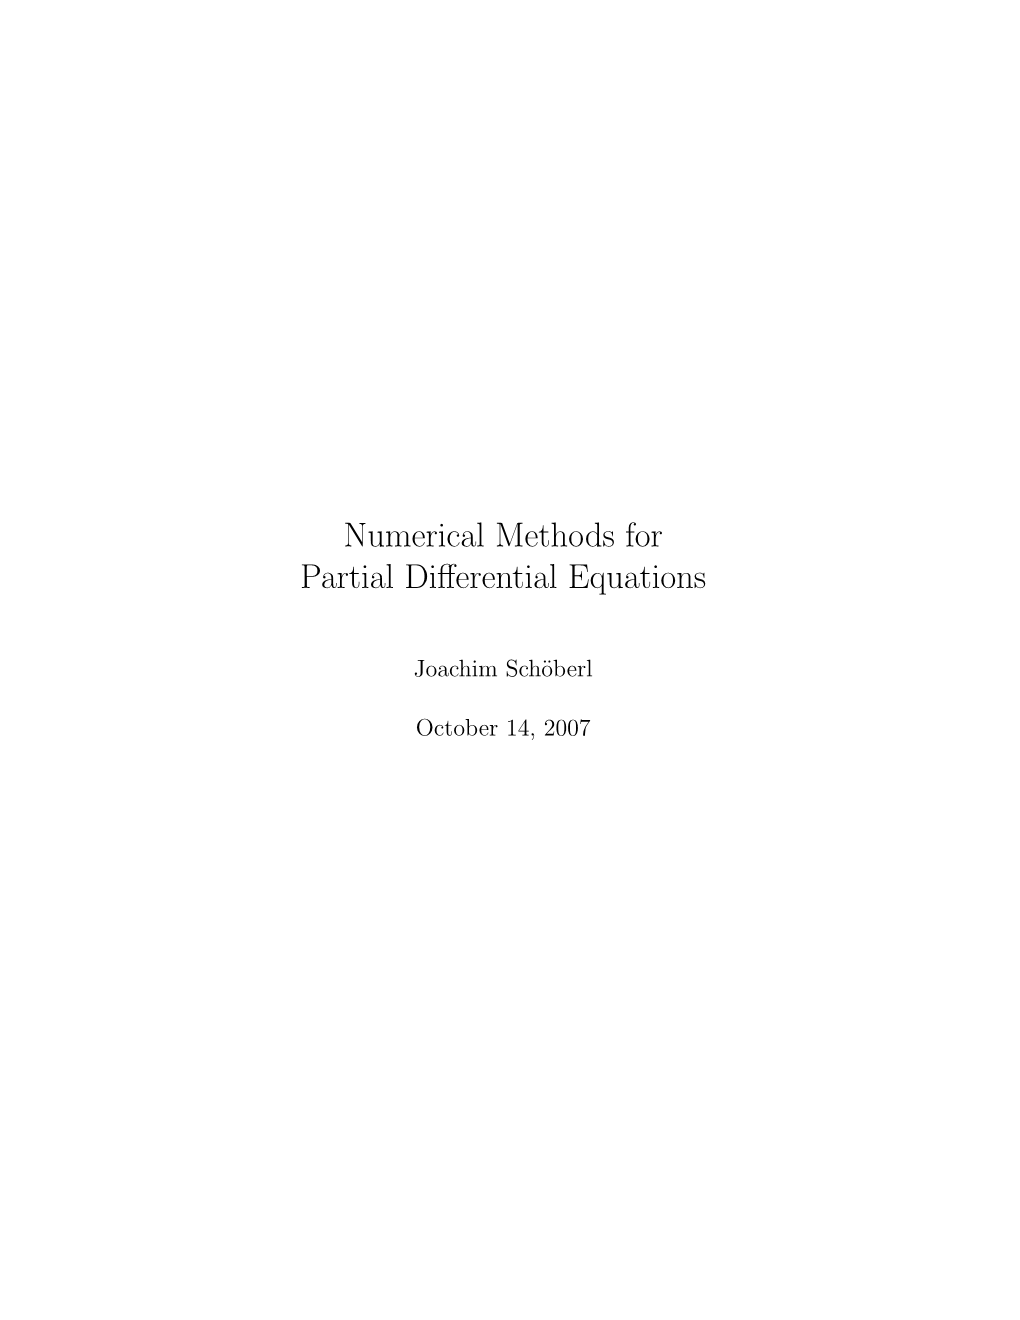 Numerical Methods for Partial Differential